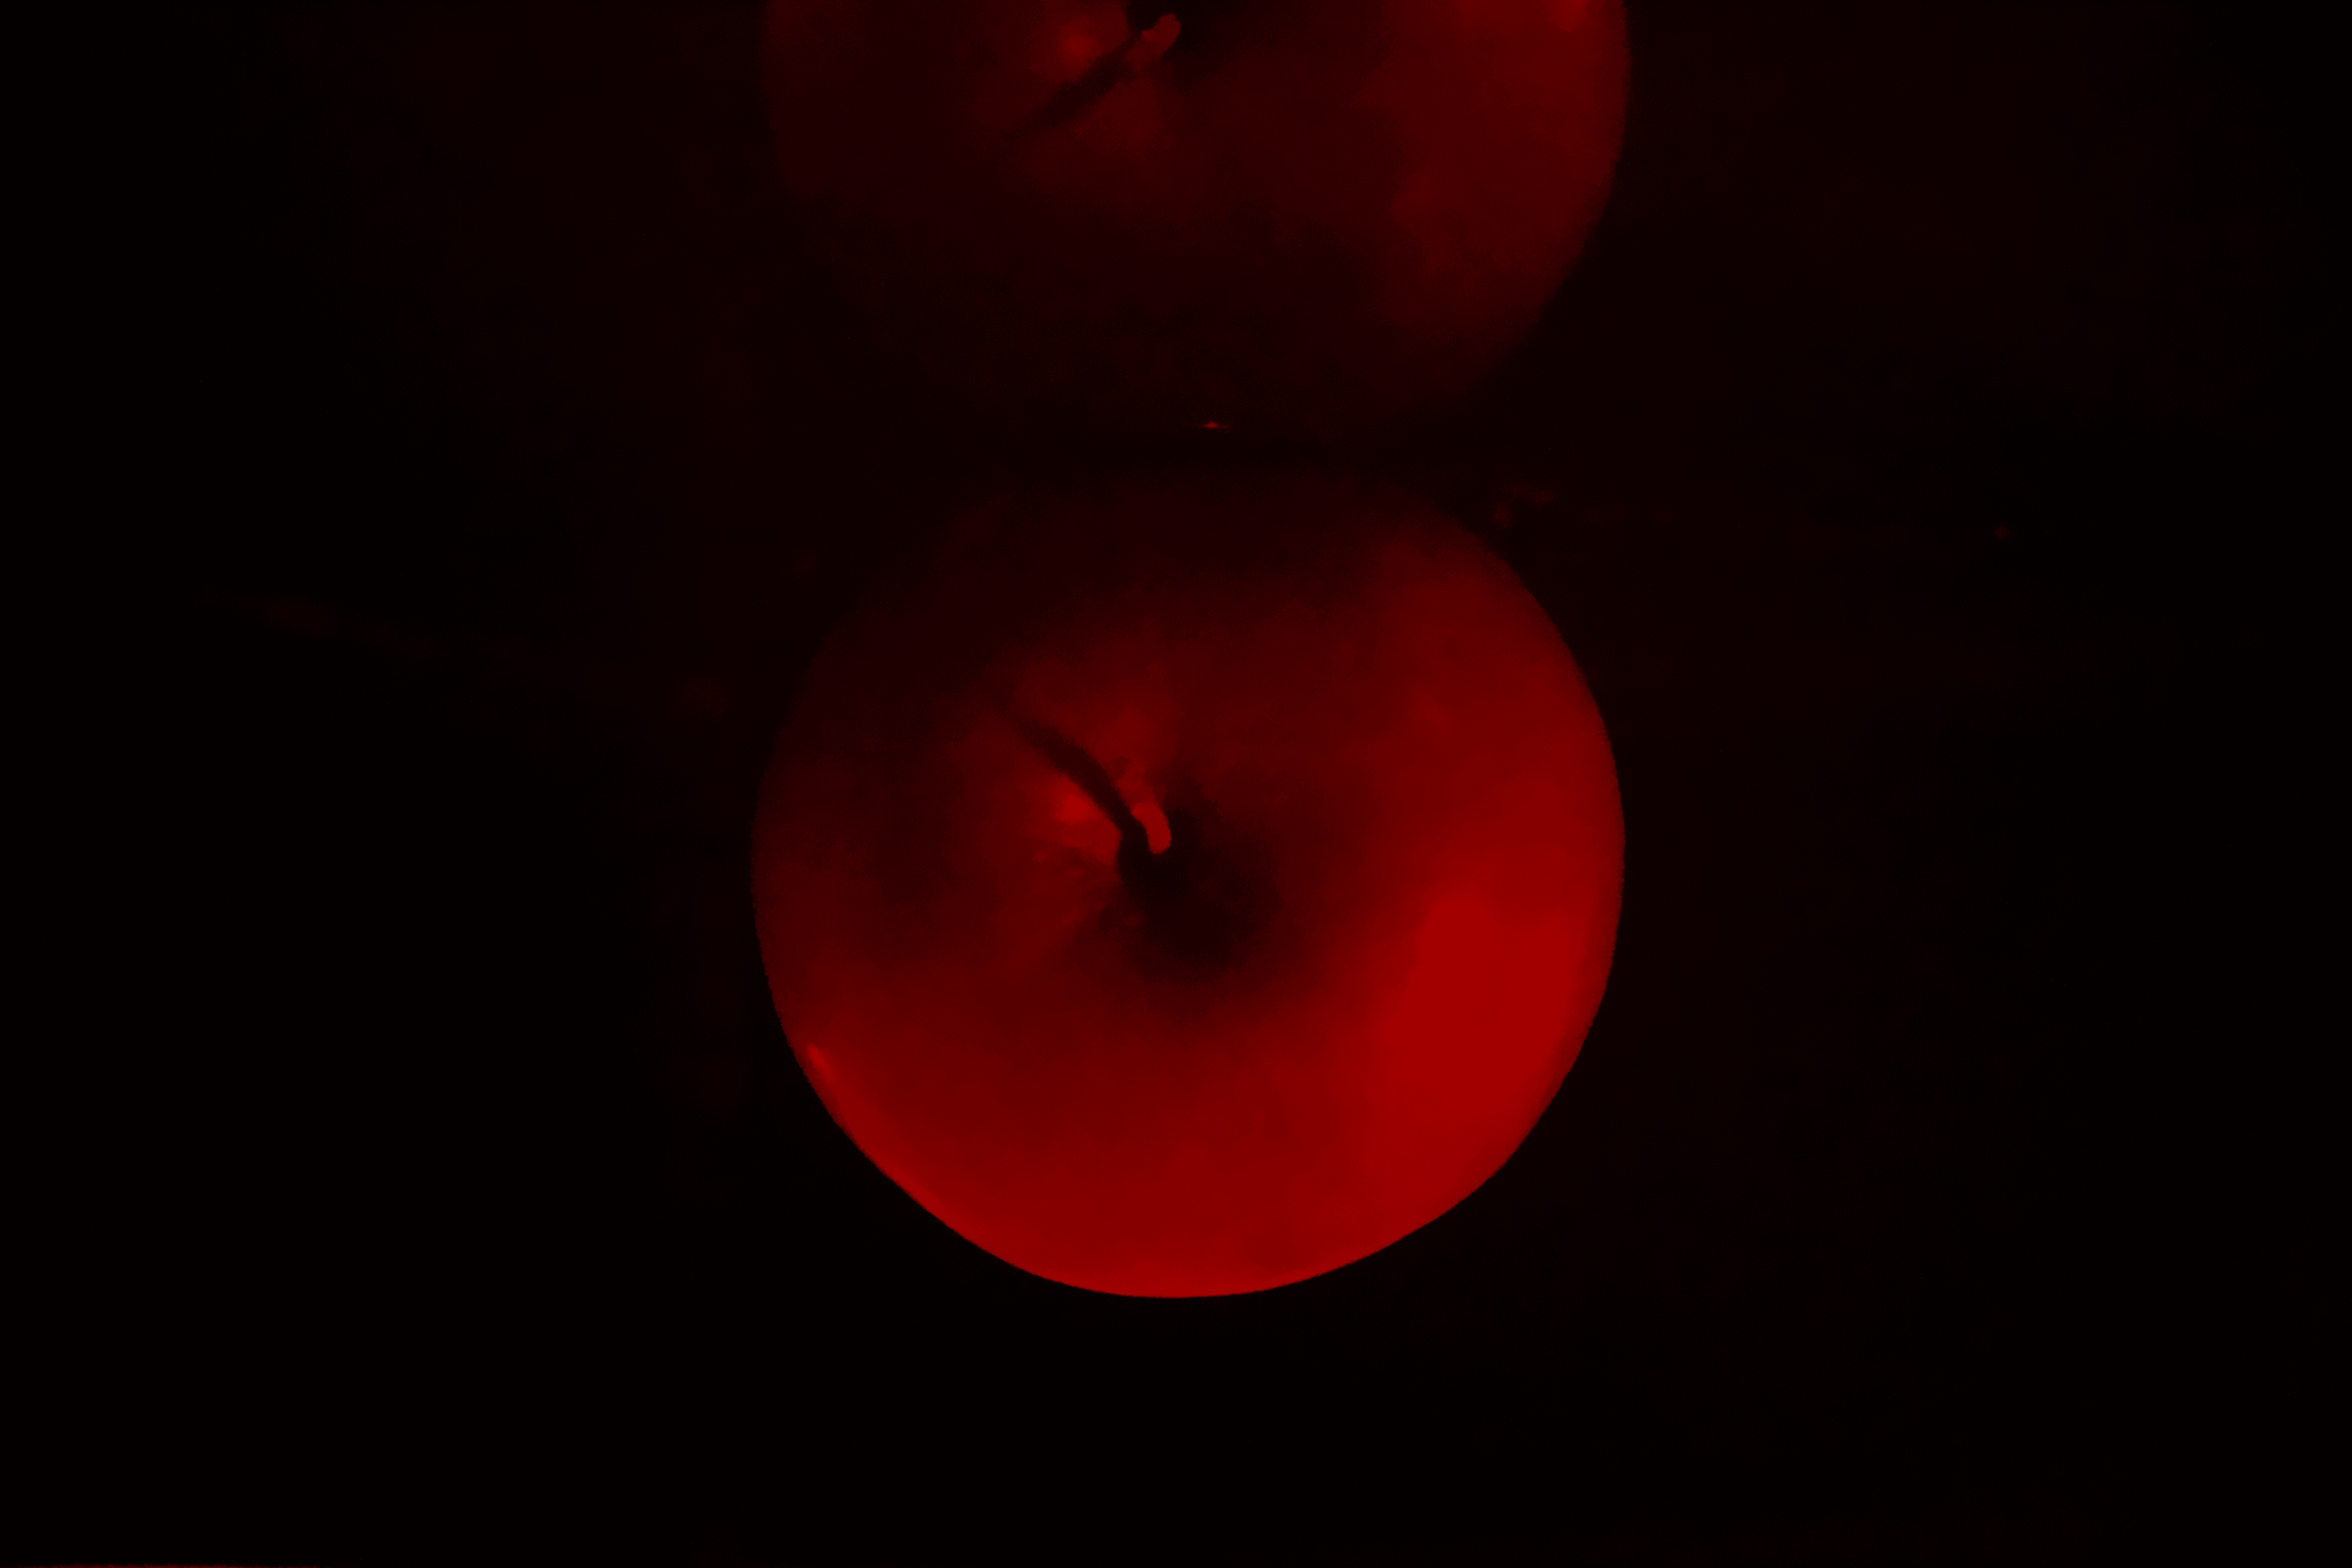 Visions of an Apple - #15